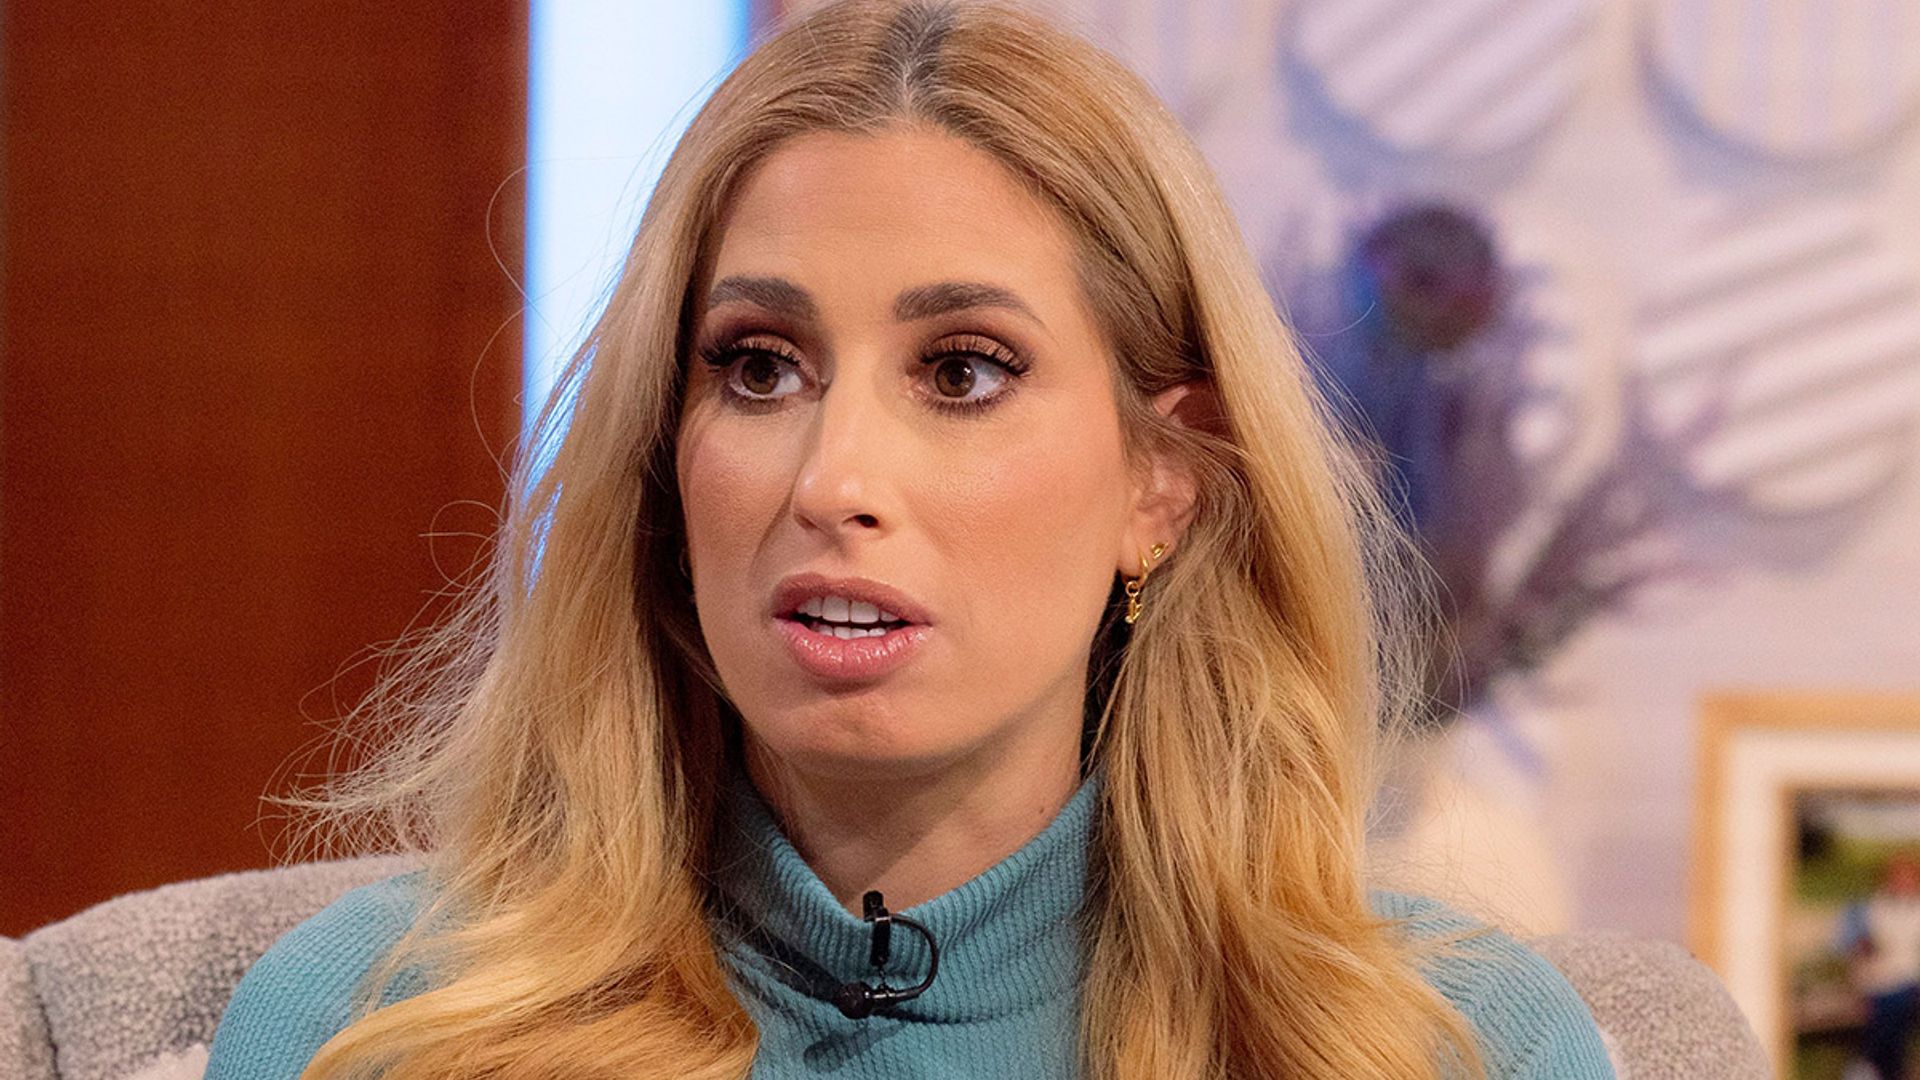 stacey solomon chats on lorraine